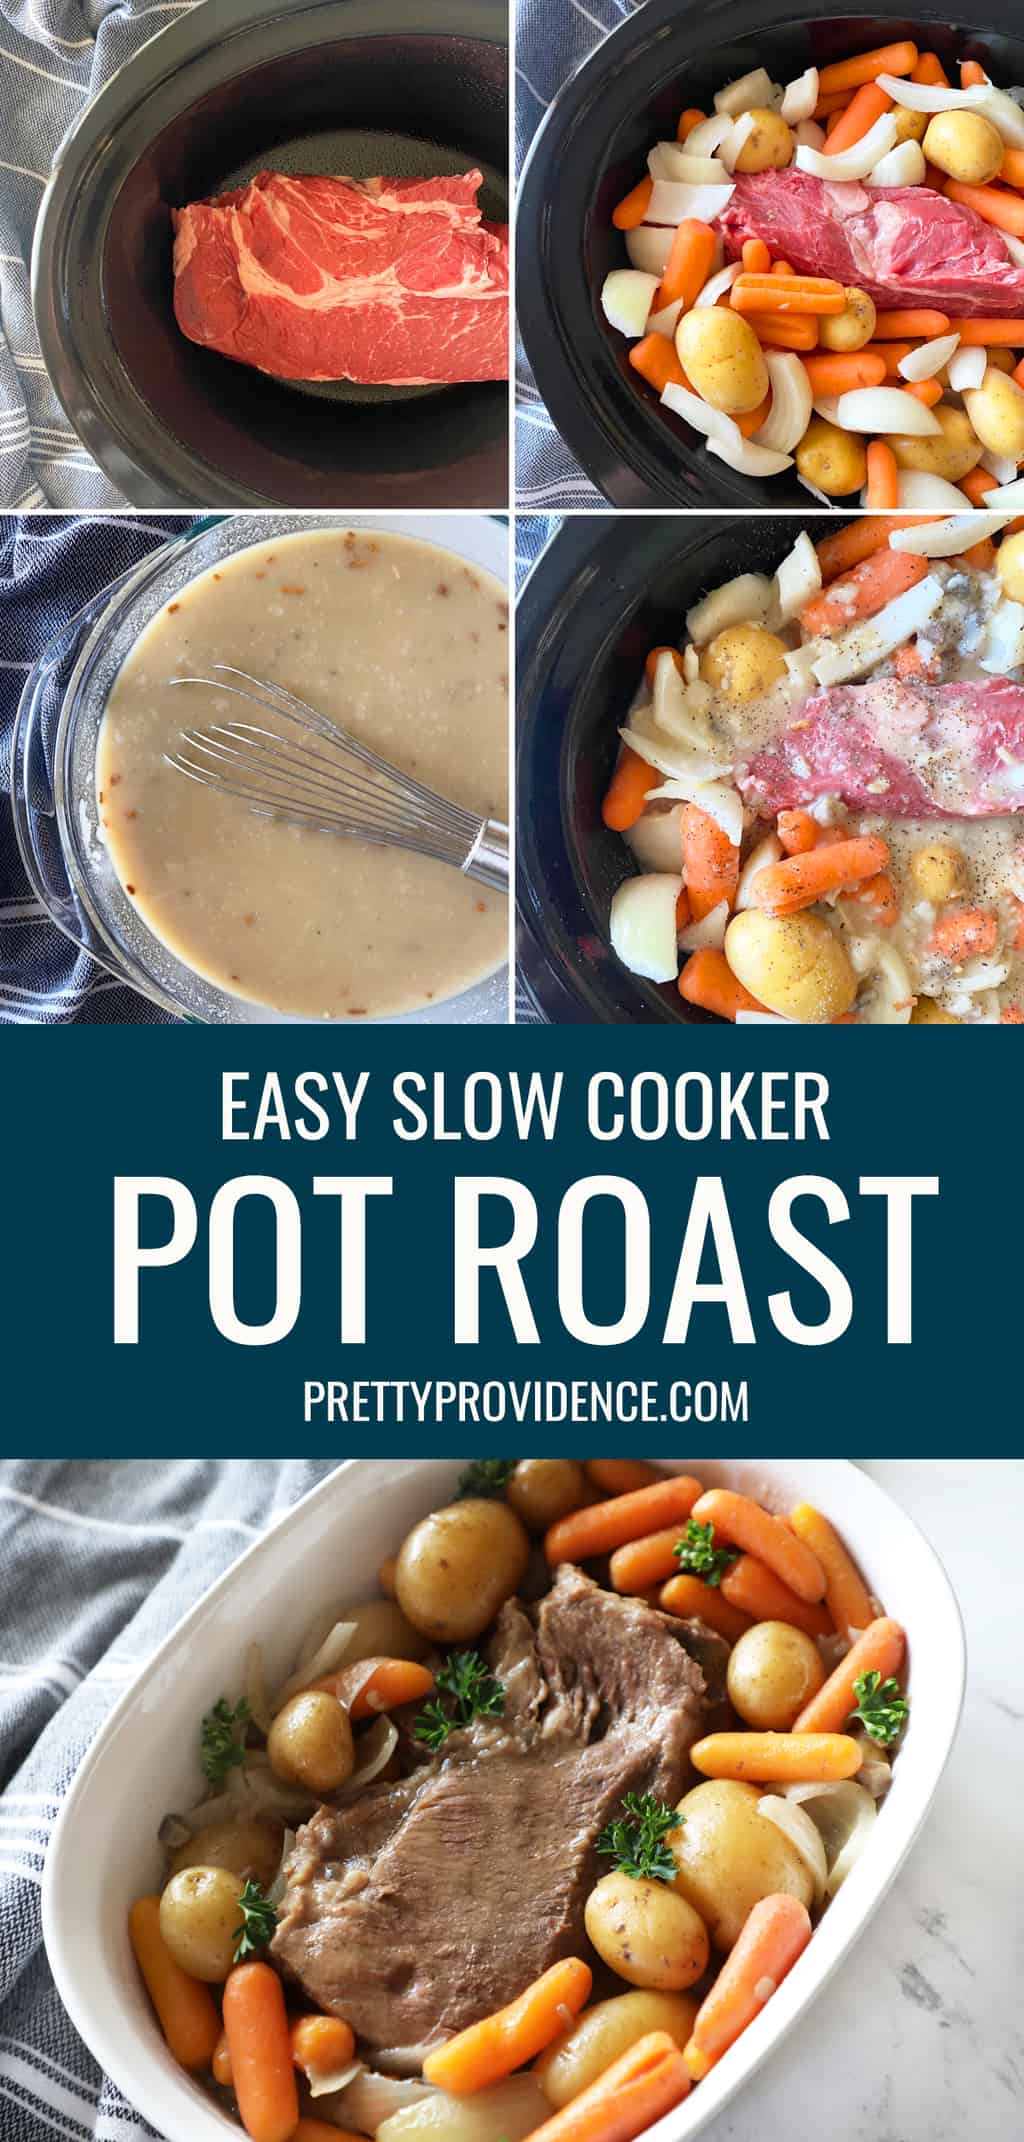 Perfect Slow Cooker Pot Roast - Pretty Providence